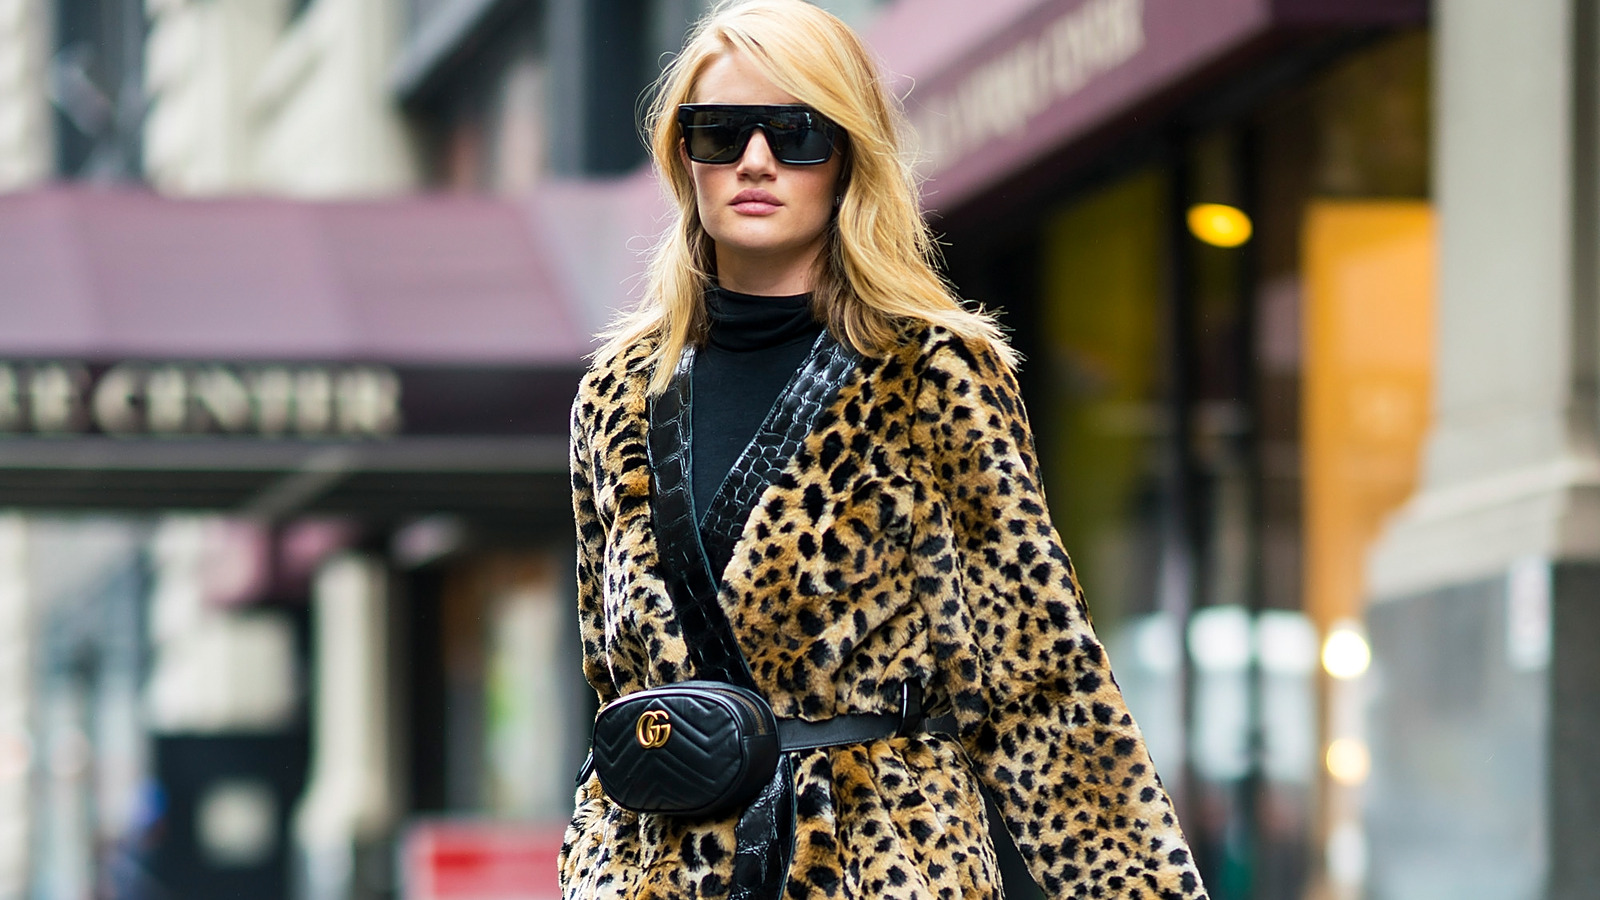 3 Easy Ways to Master the Mob Wife Aesthetic Without Getting